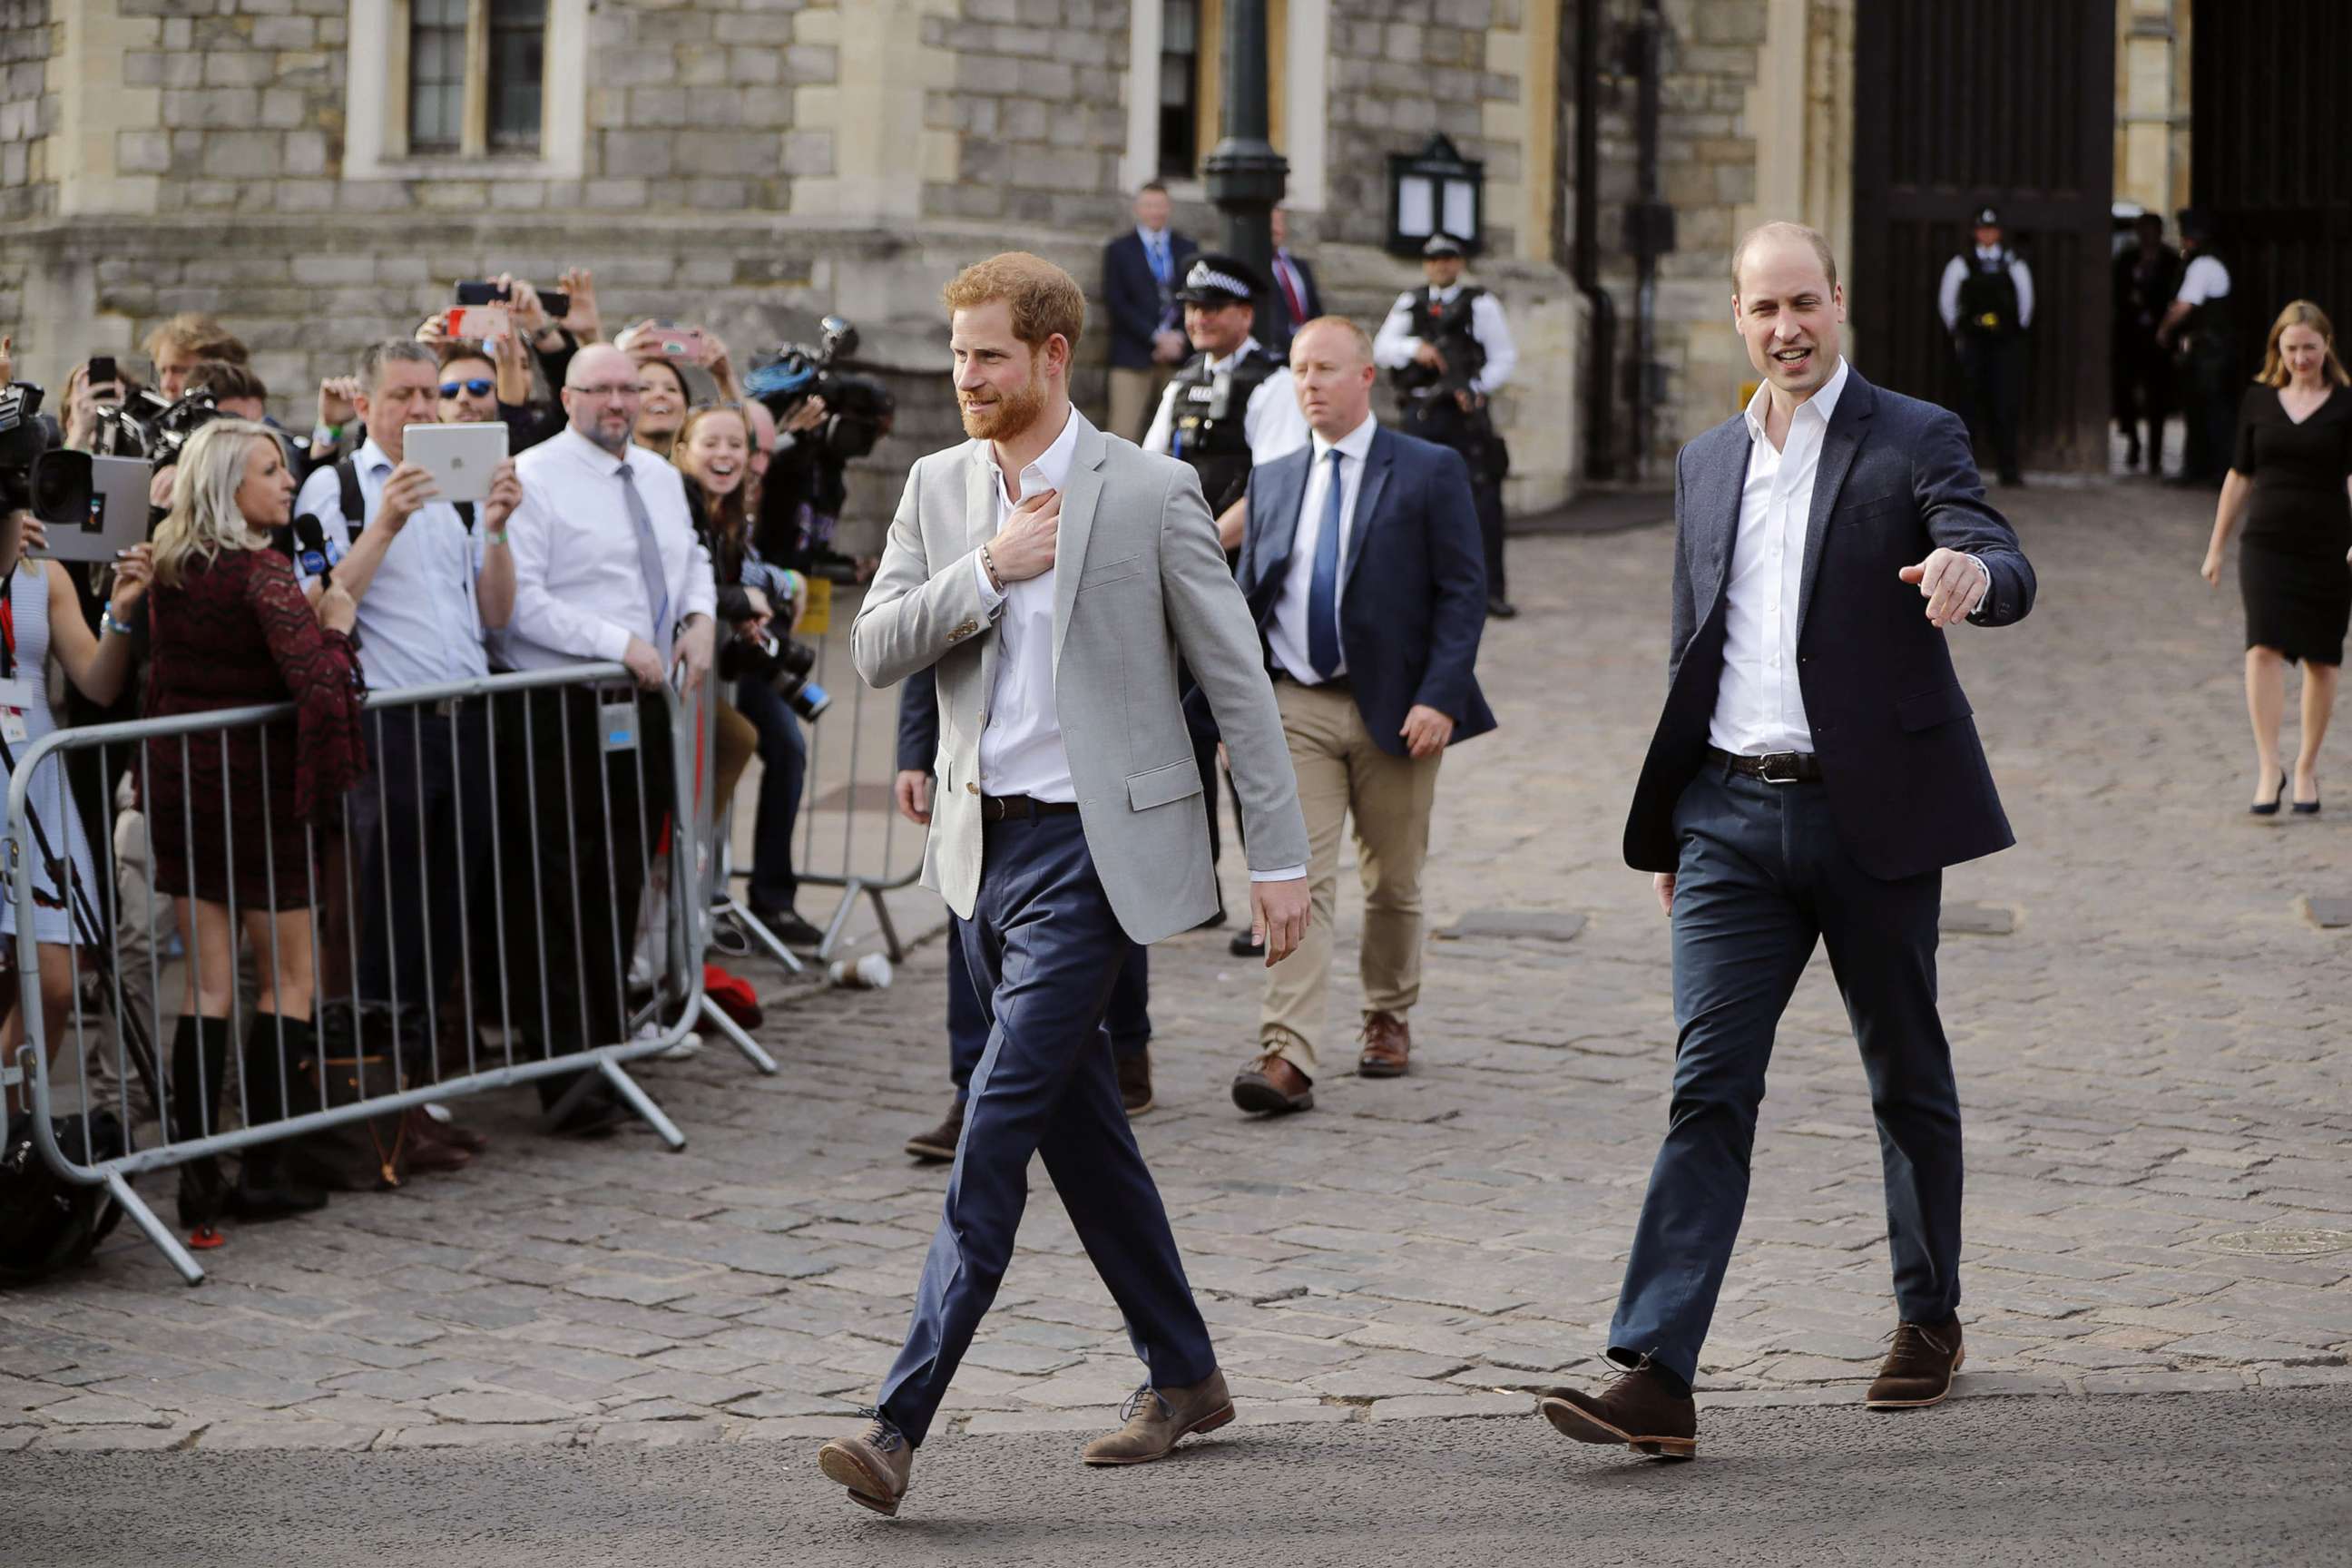 PHOTO: Prince Harry and his best man, Prince William, step out to greet well-wishers outside Windsor Castle, May 18, 2018, on the eve of Prince Harry's wedding, in Windsor, England.